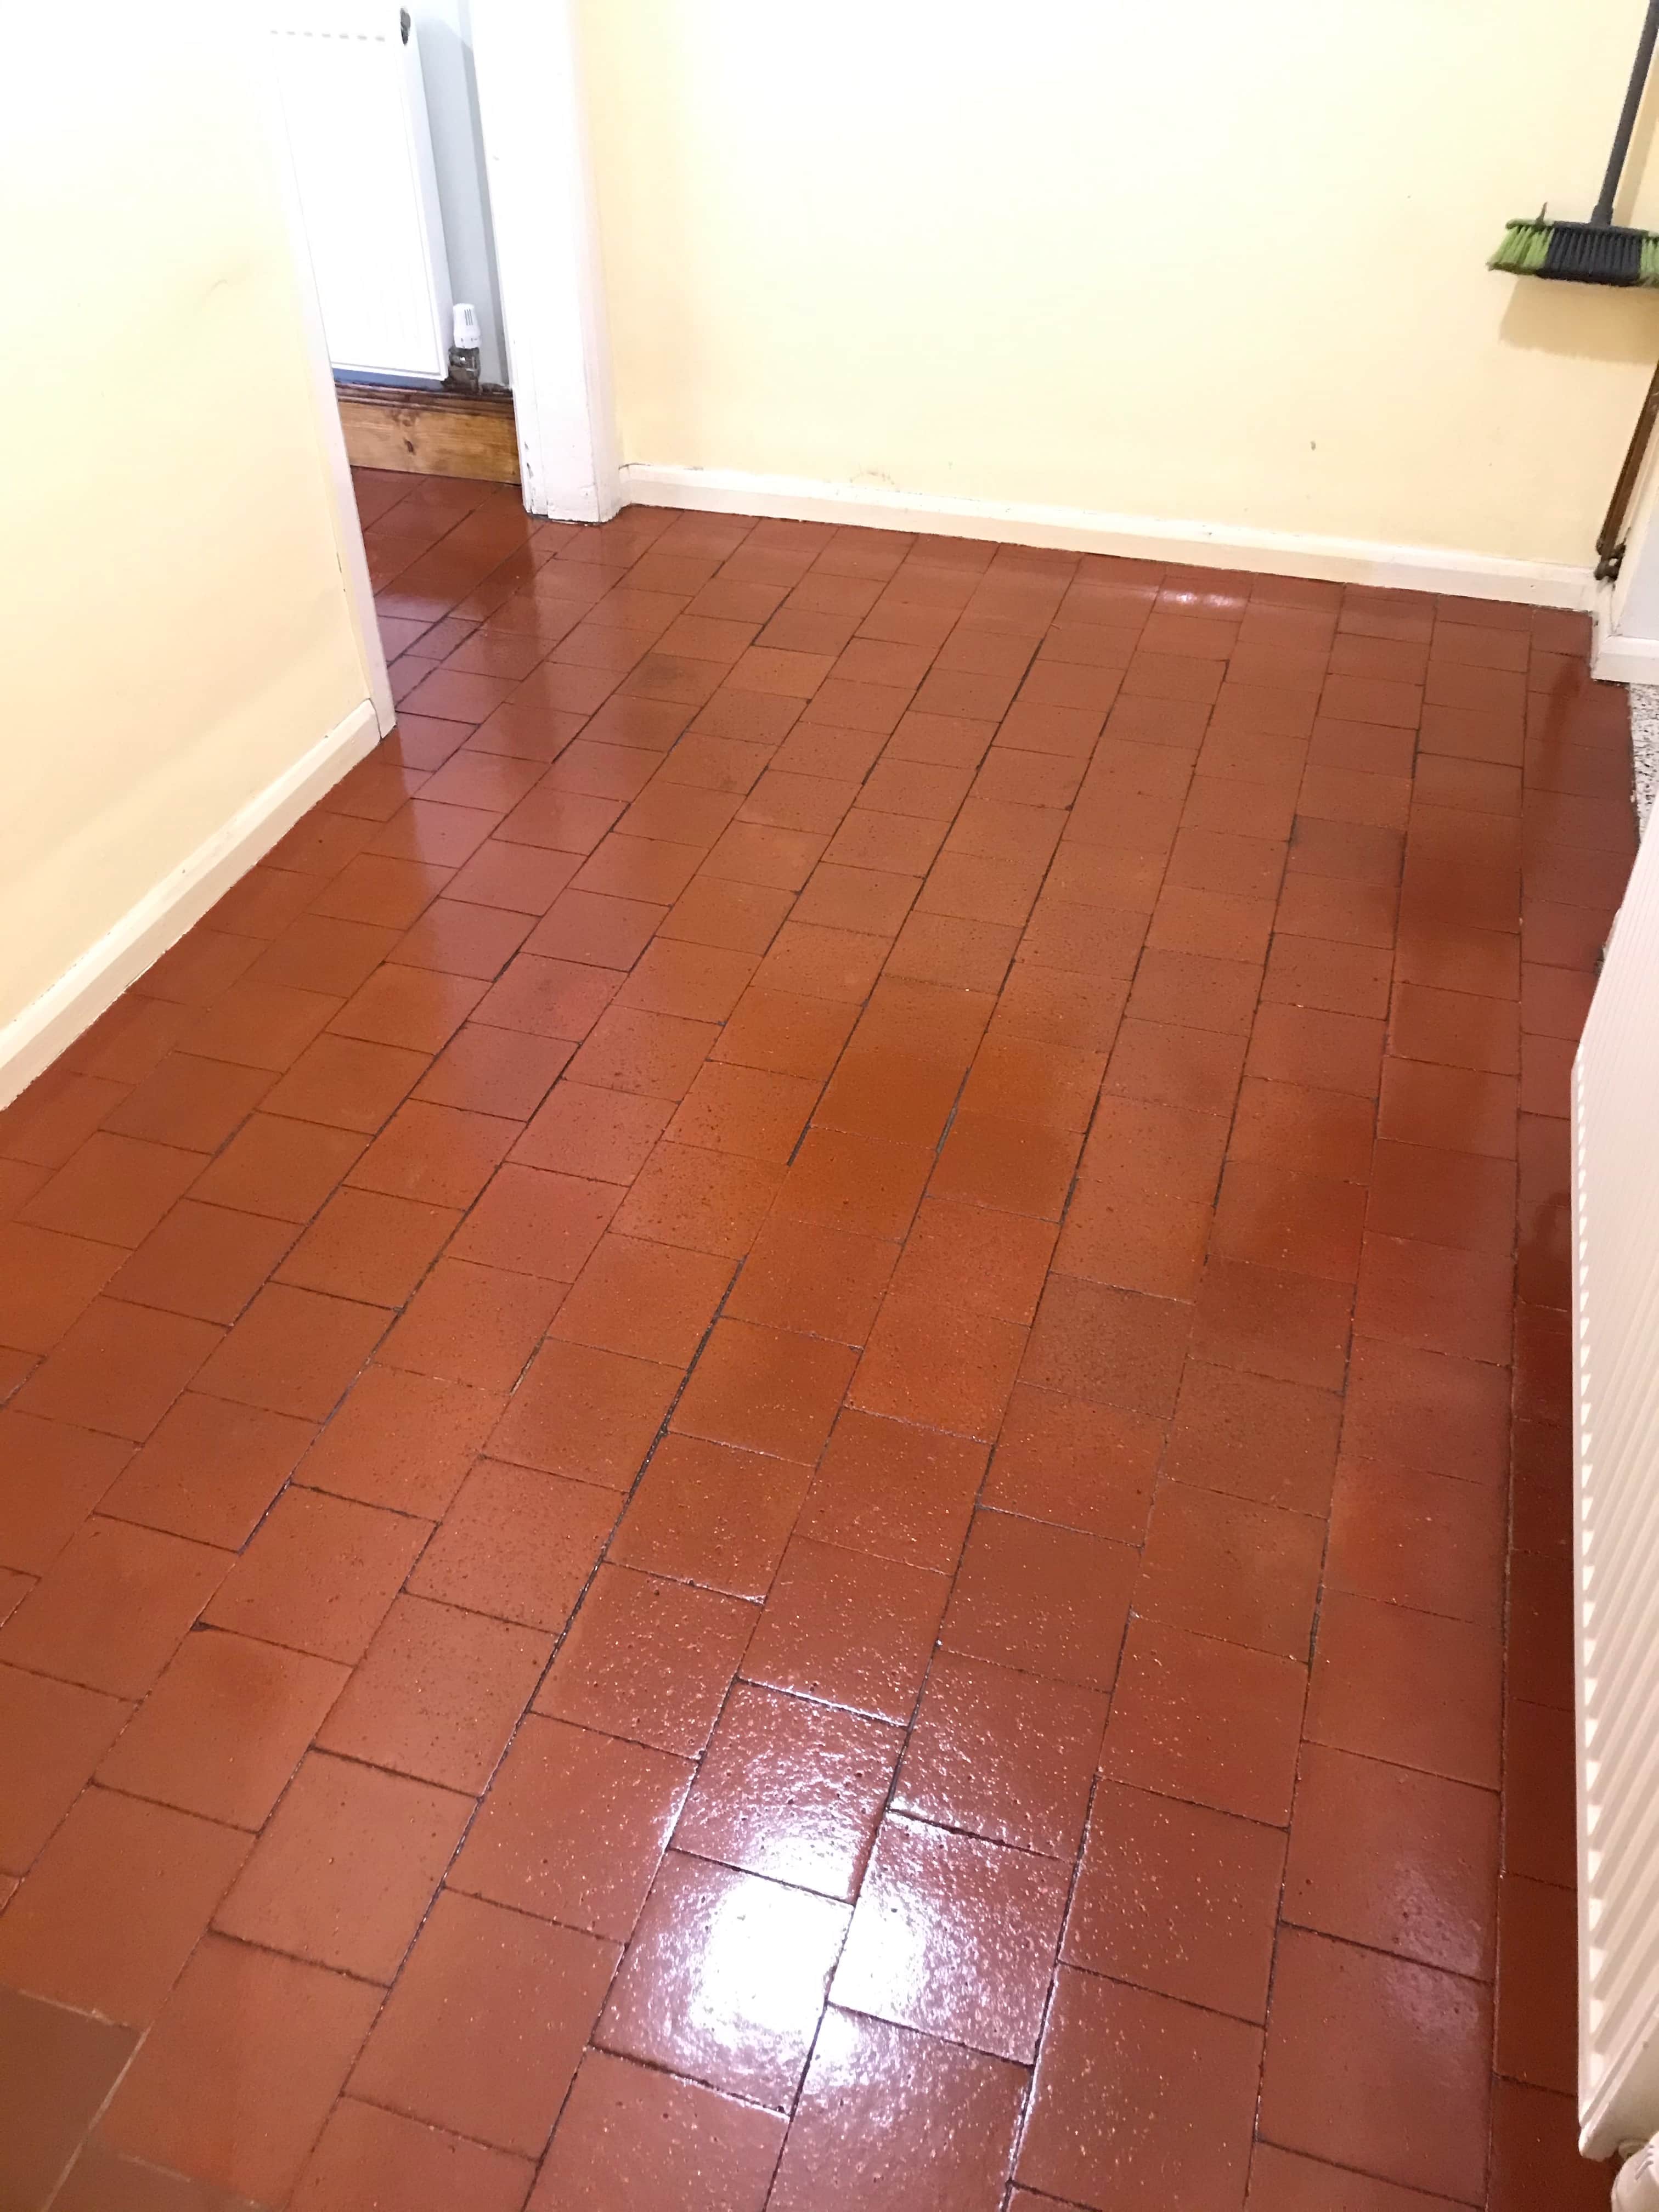 Quarry Tile Floor After Cleaning Sealing Stafford